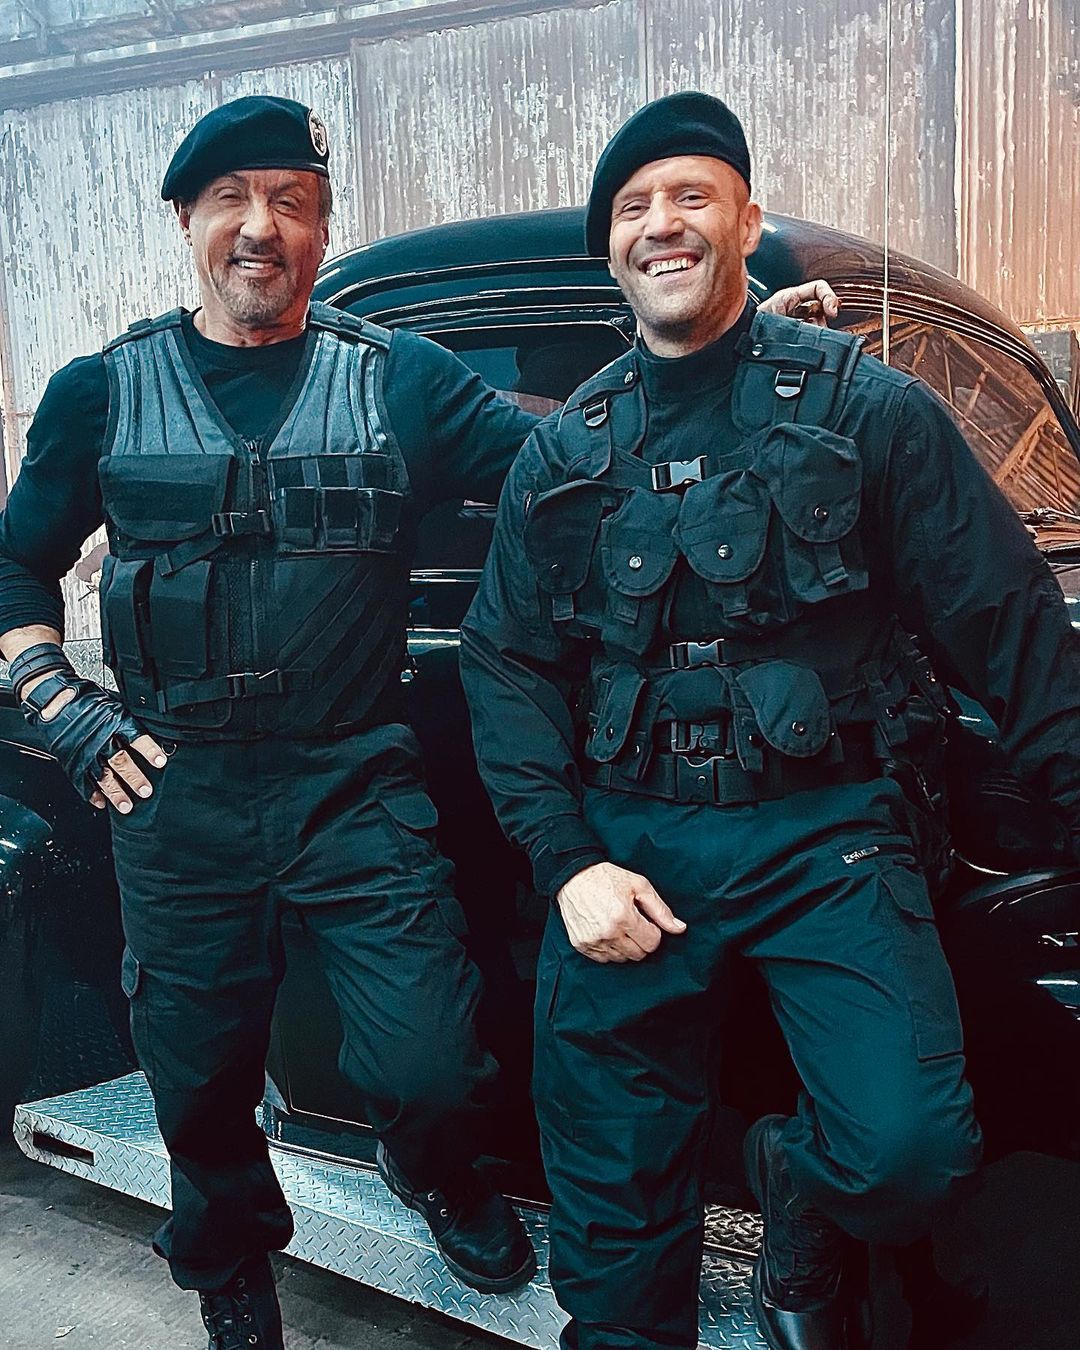 Sylvester Stallone and Jason Statham in Expendables 4 first look